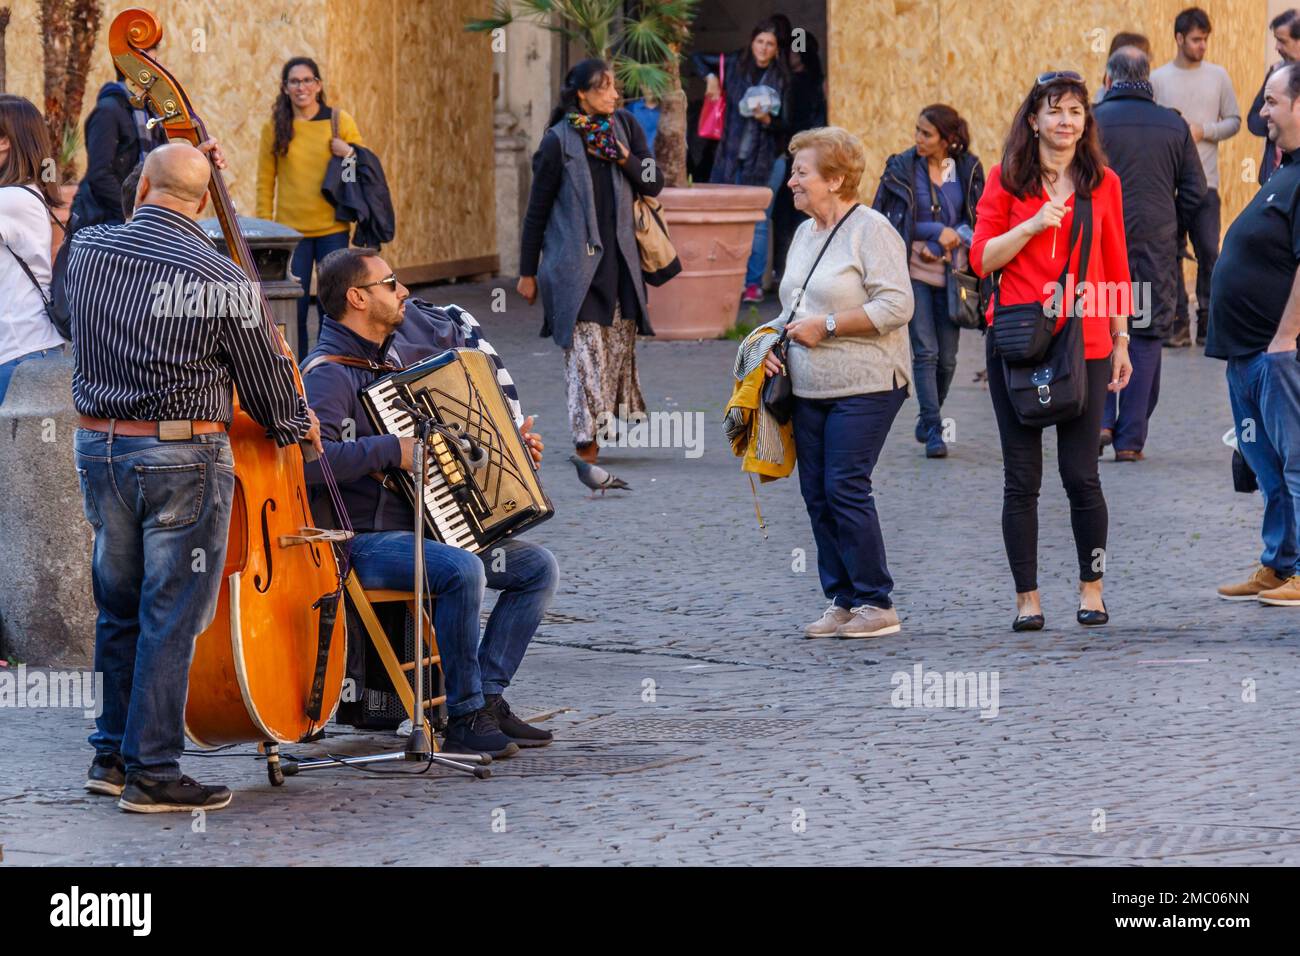 An old women dance with the music of a street group at Piazza di Santa Maria, Rome. Stock Photo